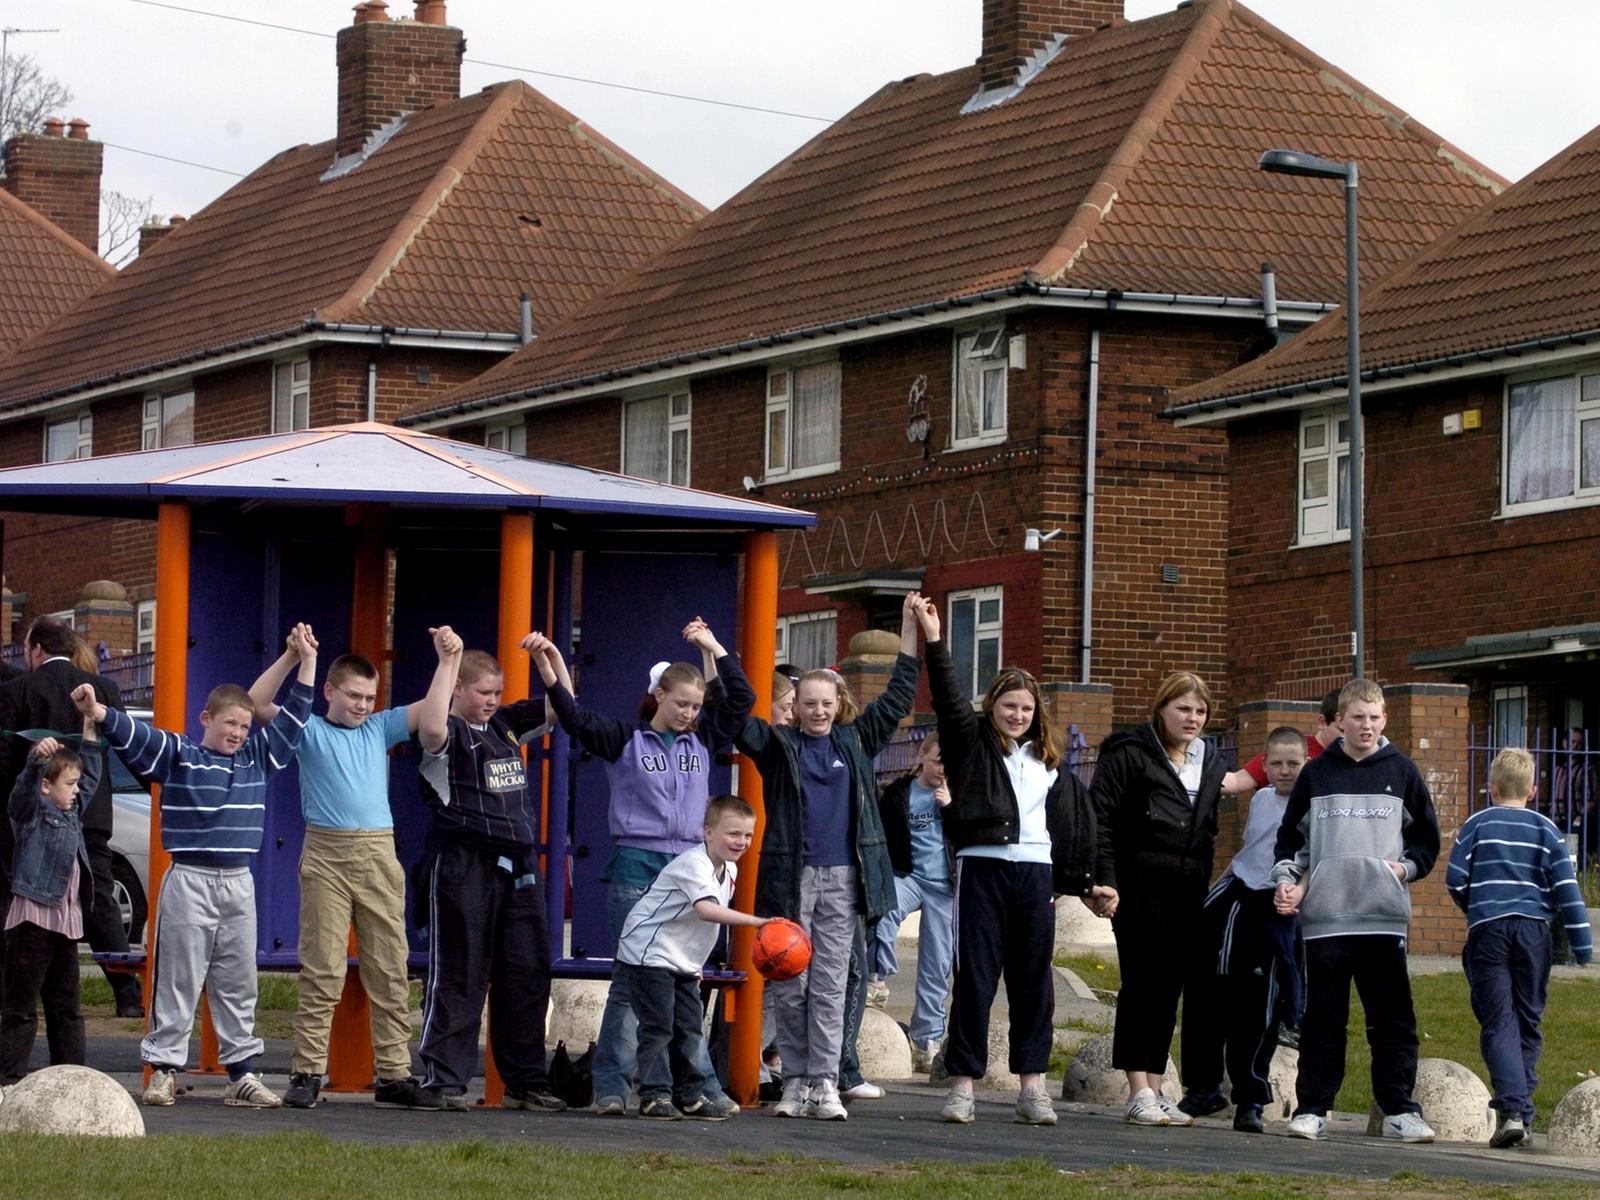 Youngsters gather near one of the new youth shelters on the Halton Moor Estate.